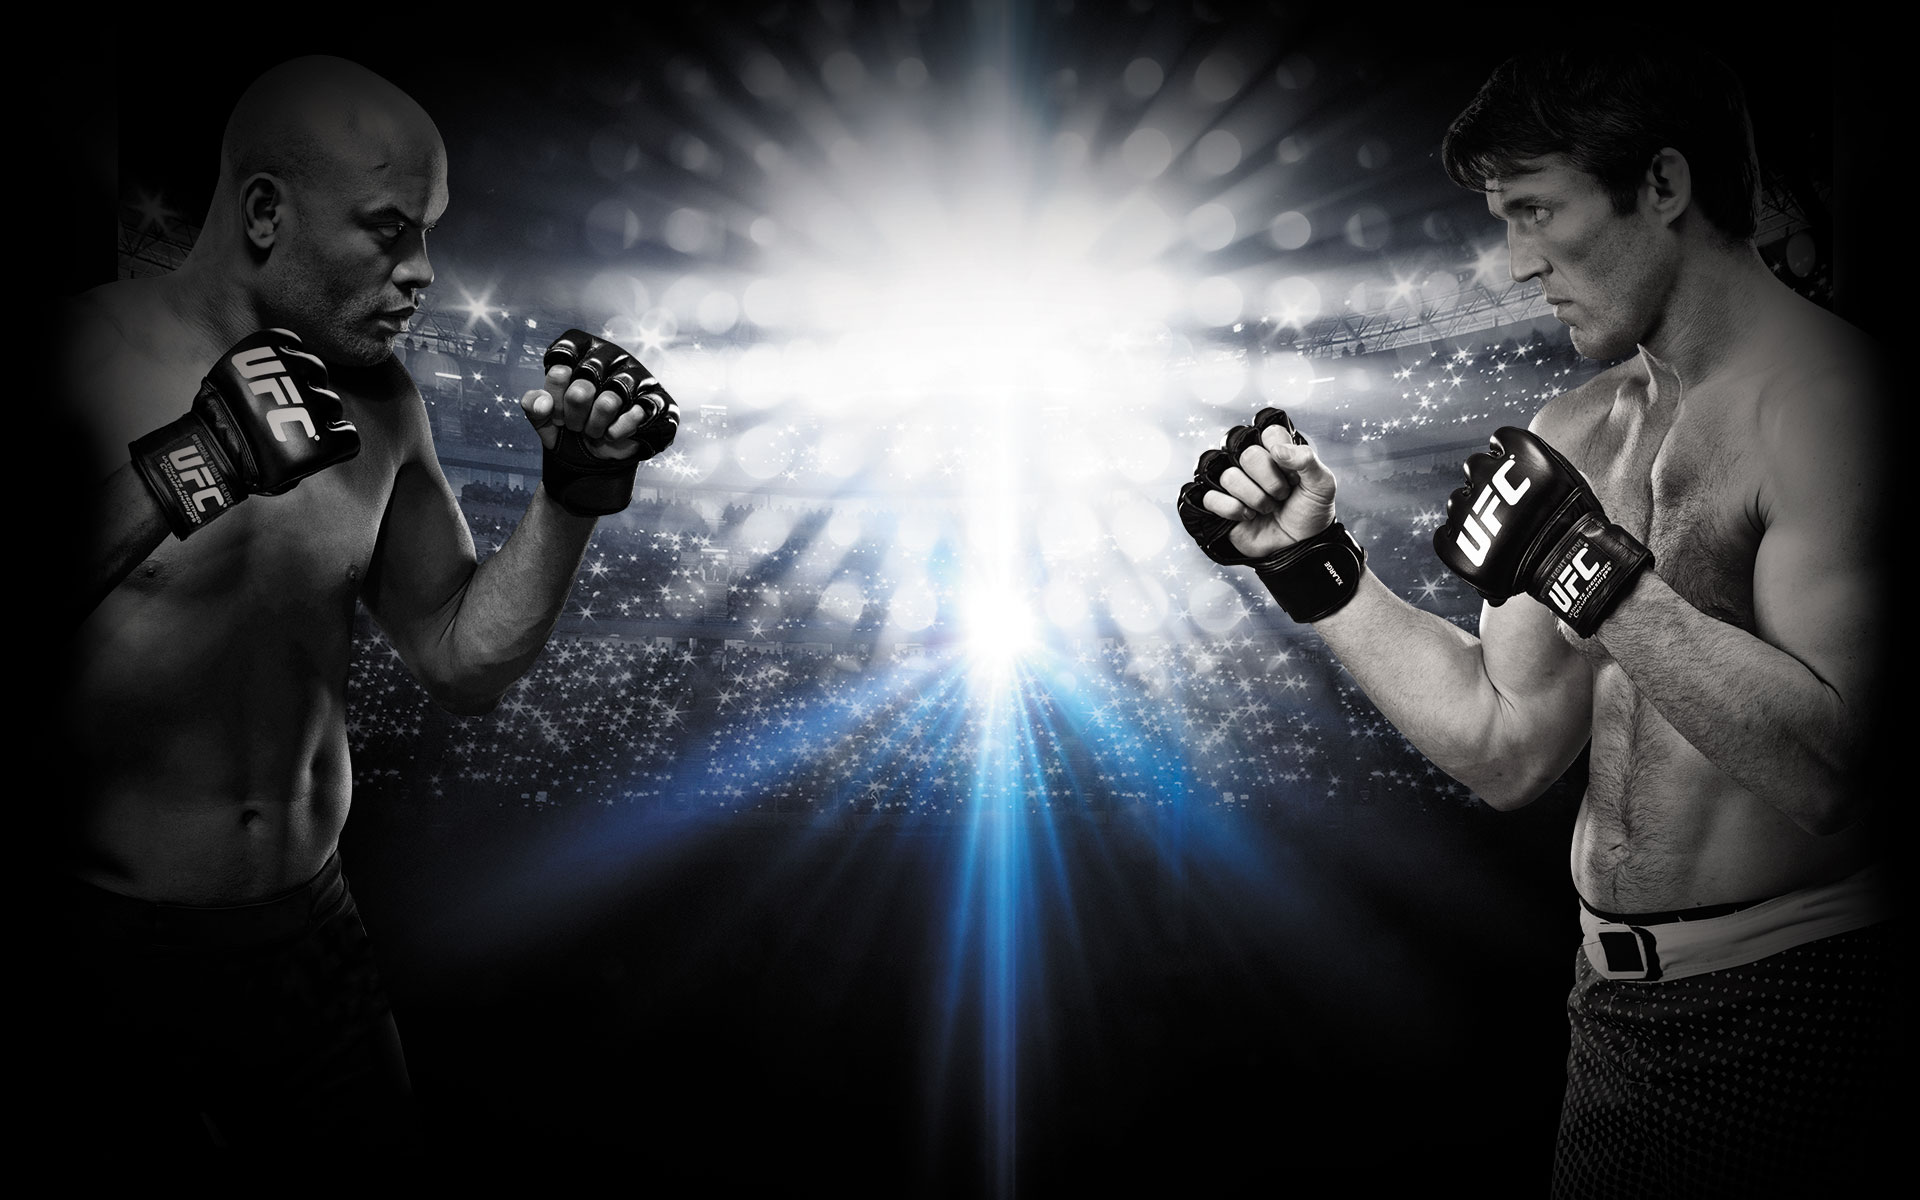 Anderson Silva Wallpaper hd wallpapers ›› Page 0 | ForWallpapers.com